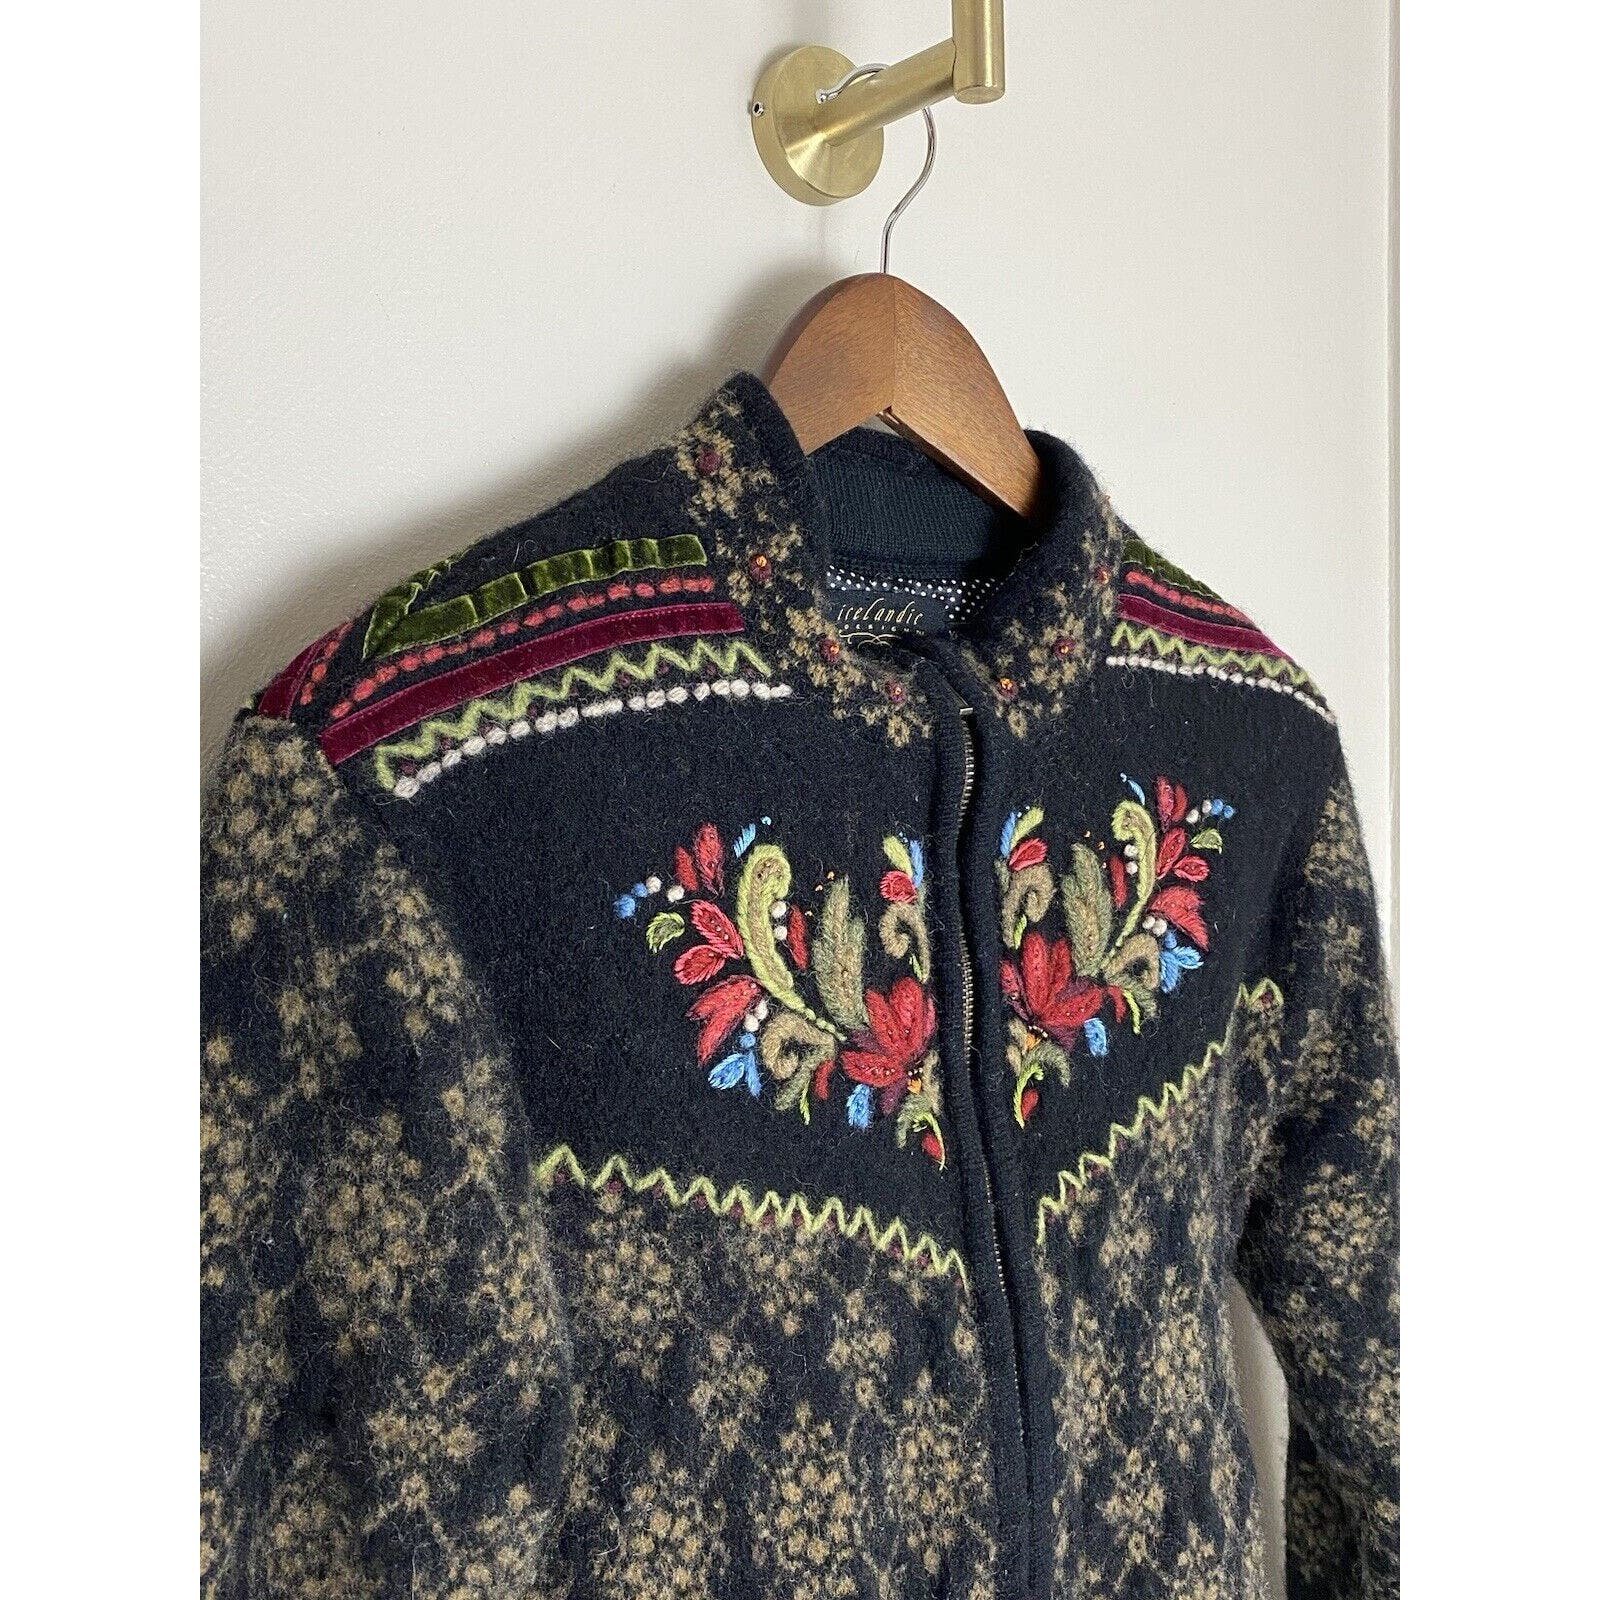 Affordable Icelandic Design Womens Full Zip Wool Embroidered Cardigan Sweater Size S/M VTG ozvcQvapb online store